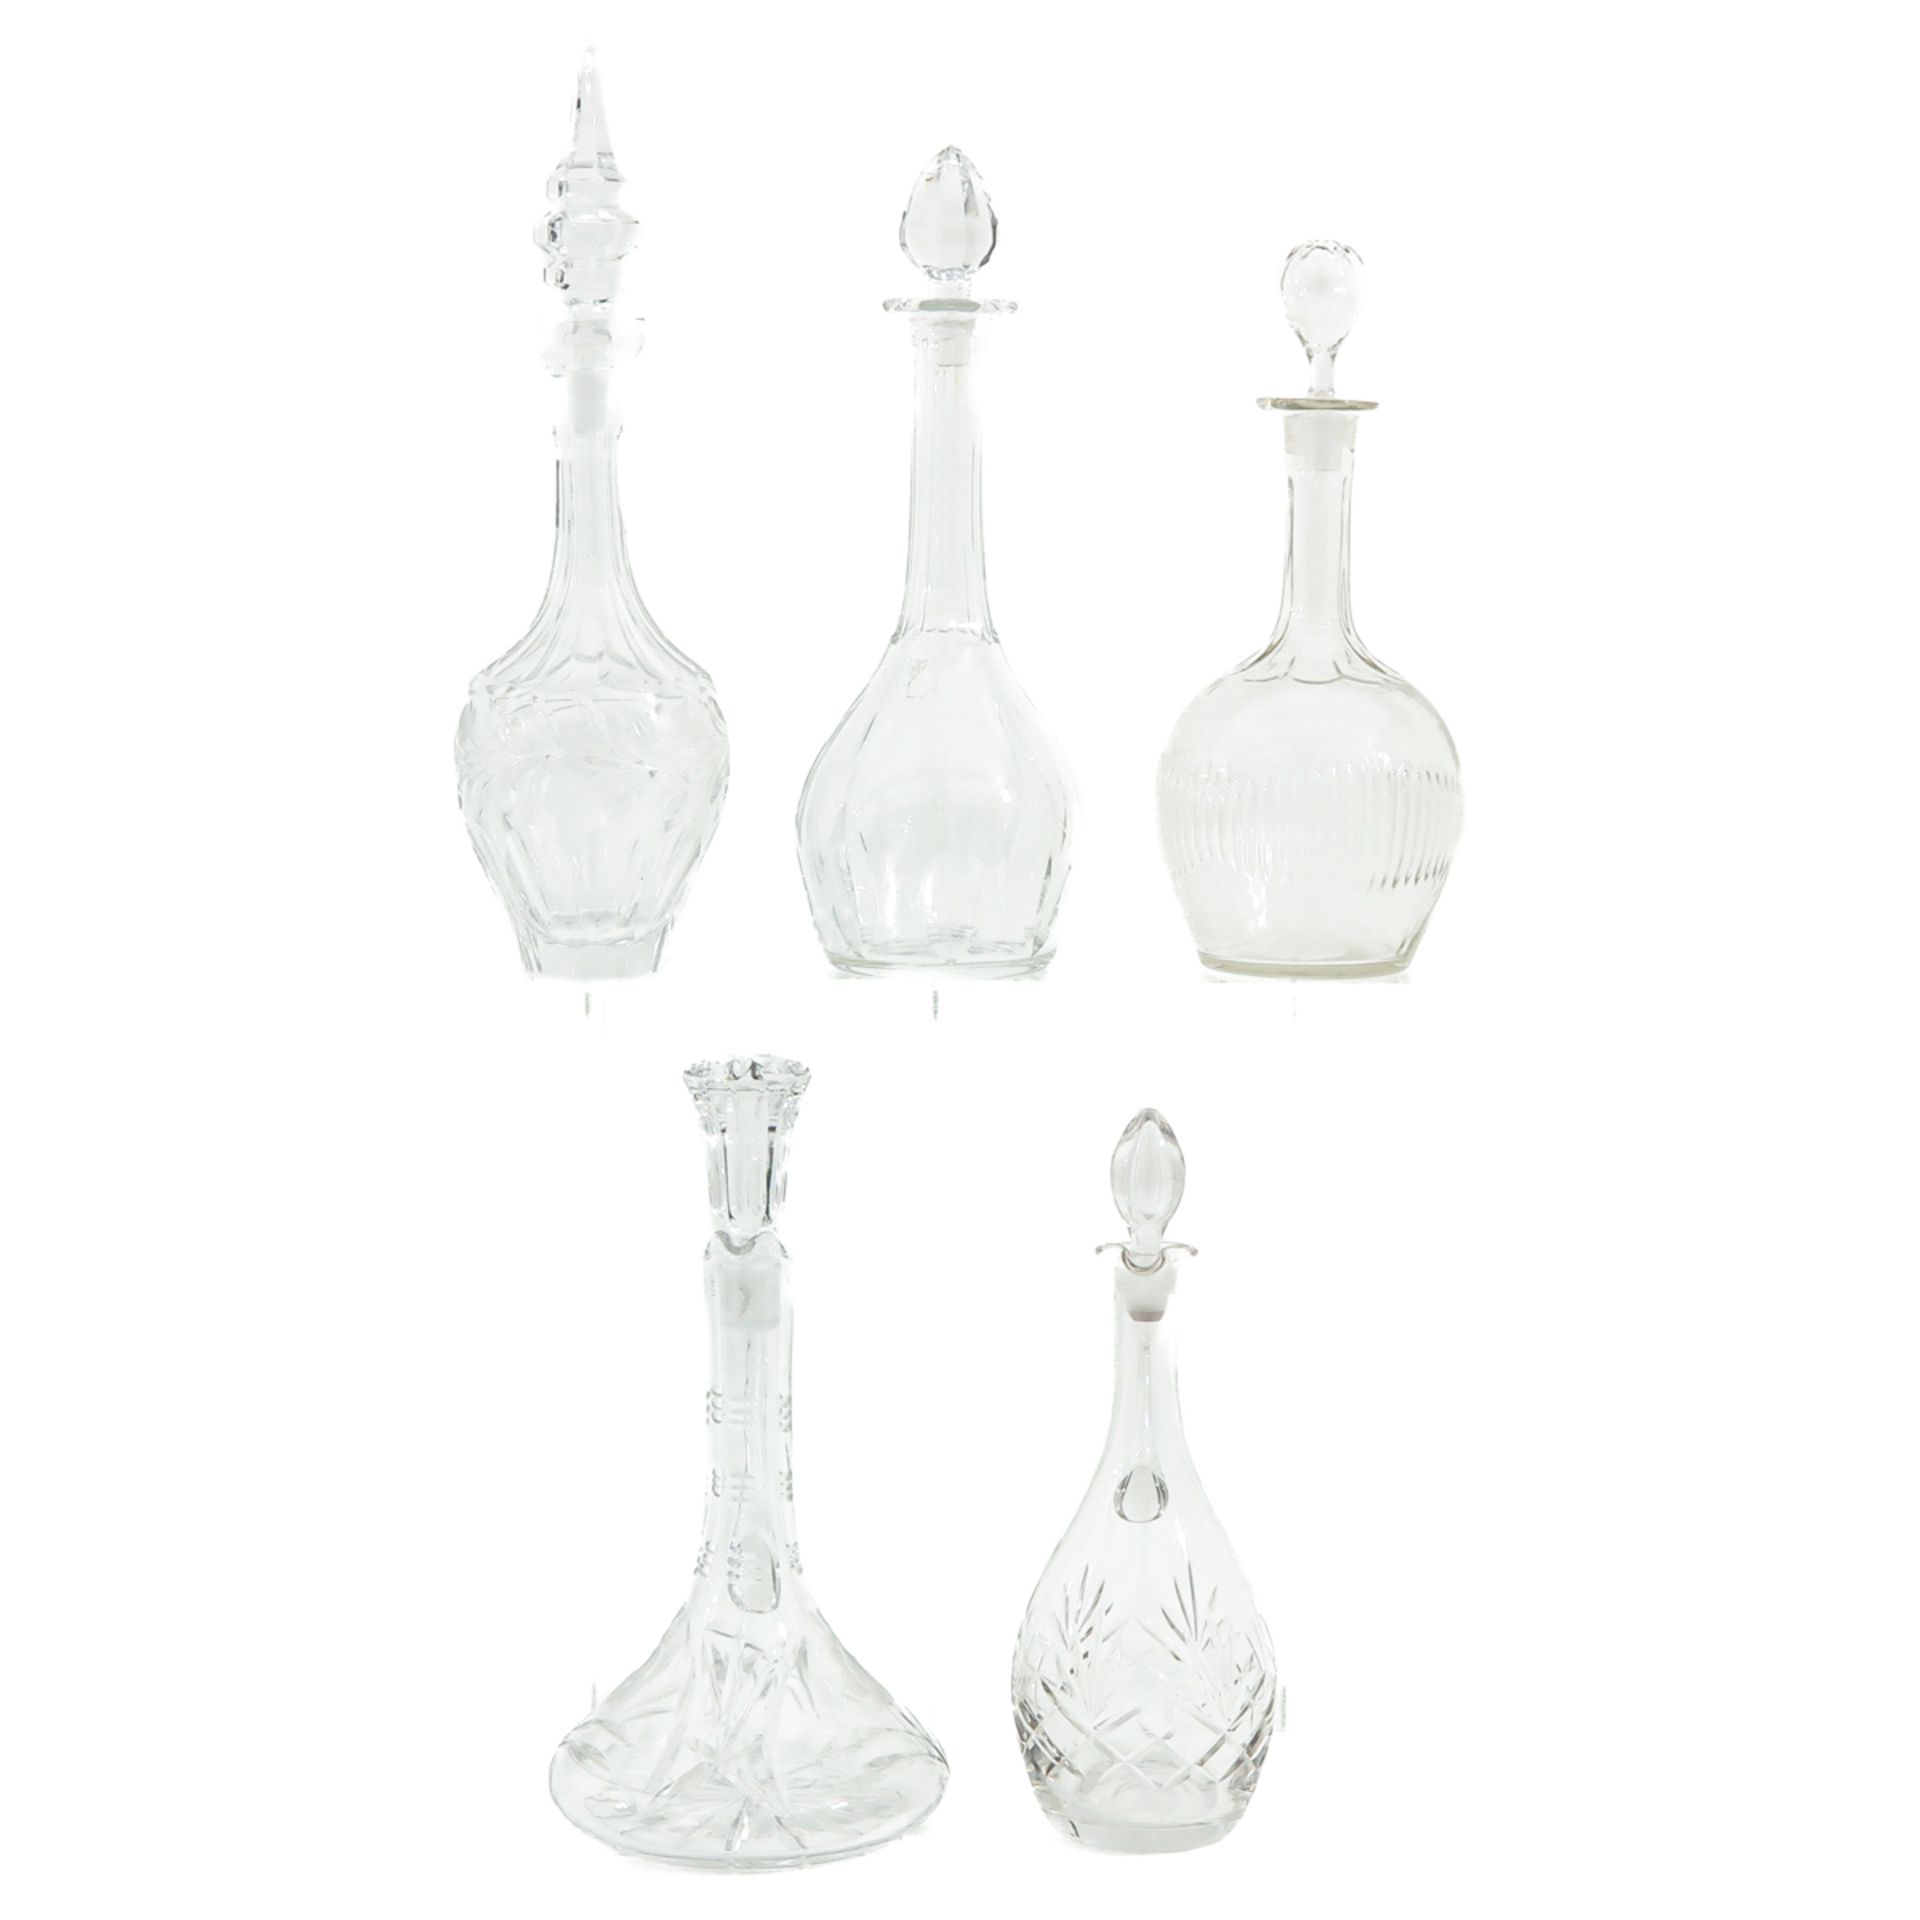 A Collection of Decanters - Image 4 of 10